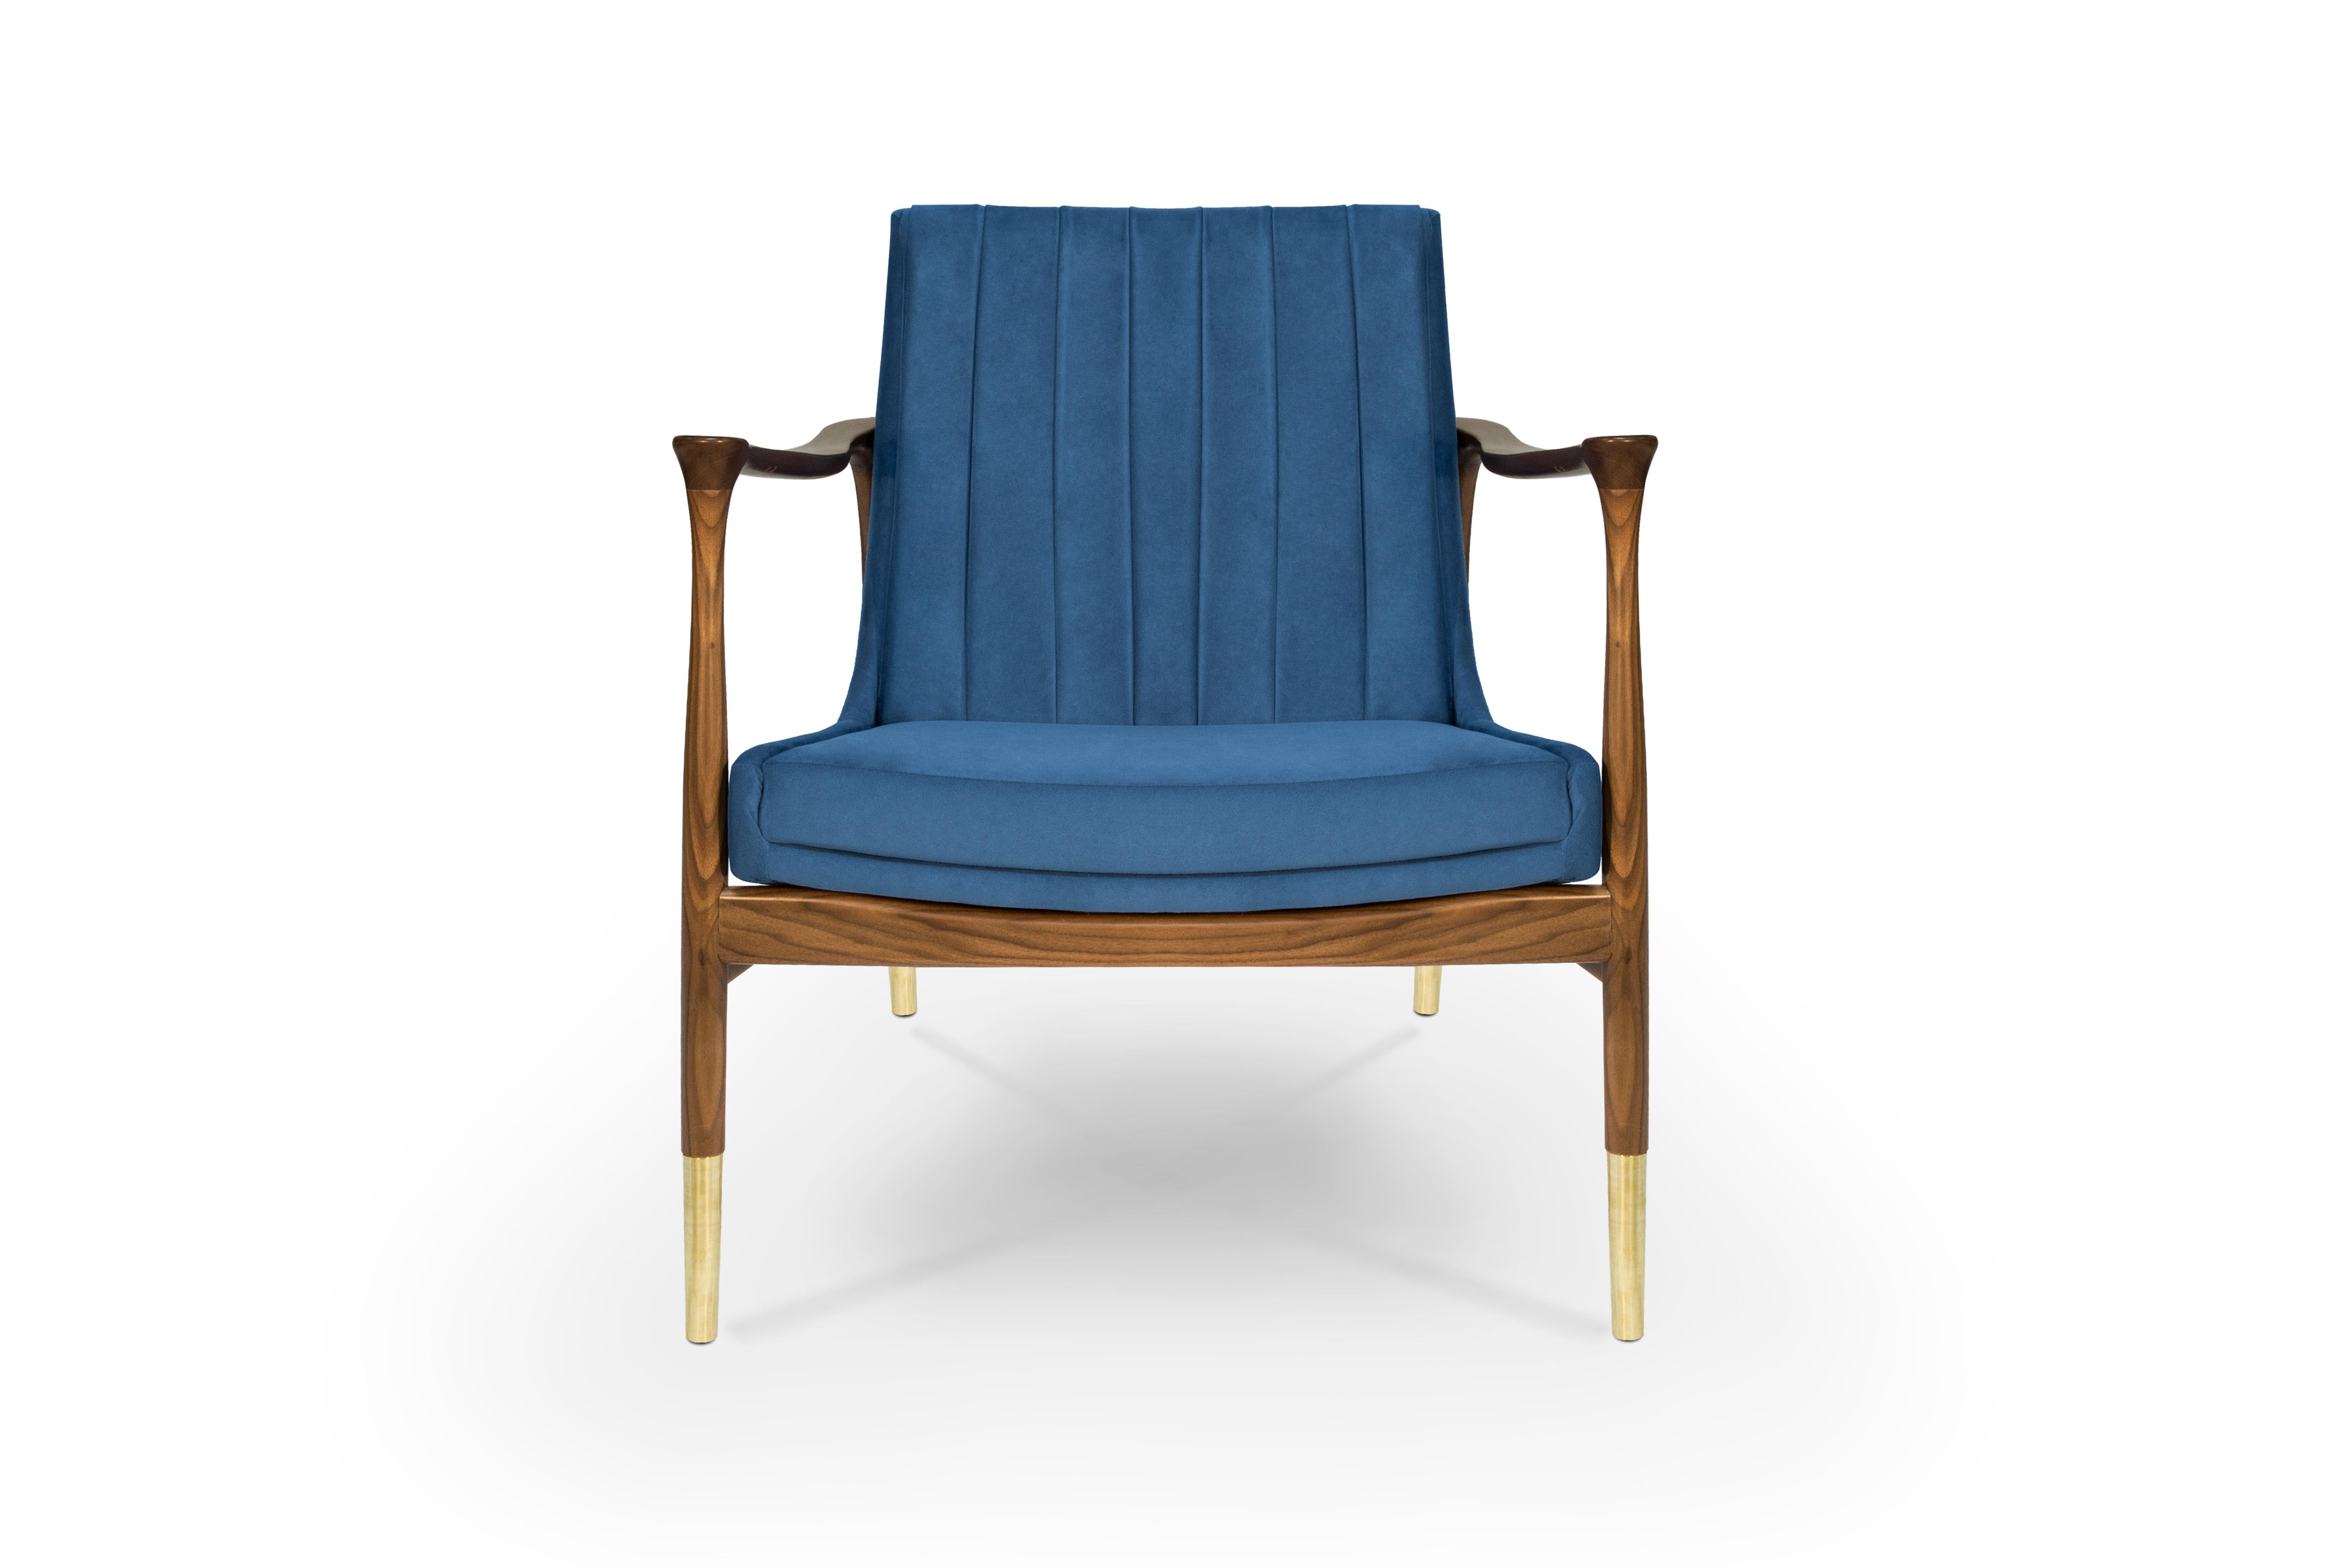 Hudson Armchair is probably one of our most classic design pieces. It tends to be sober thanks to it’s occasional design, but it really stands out because of its leather upholstery. The body structure is produced in solid walnut wood with metal